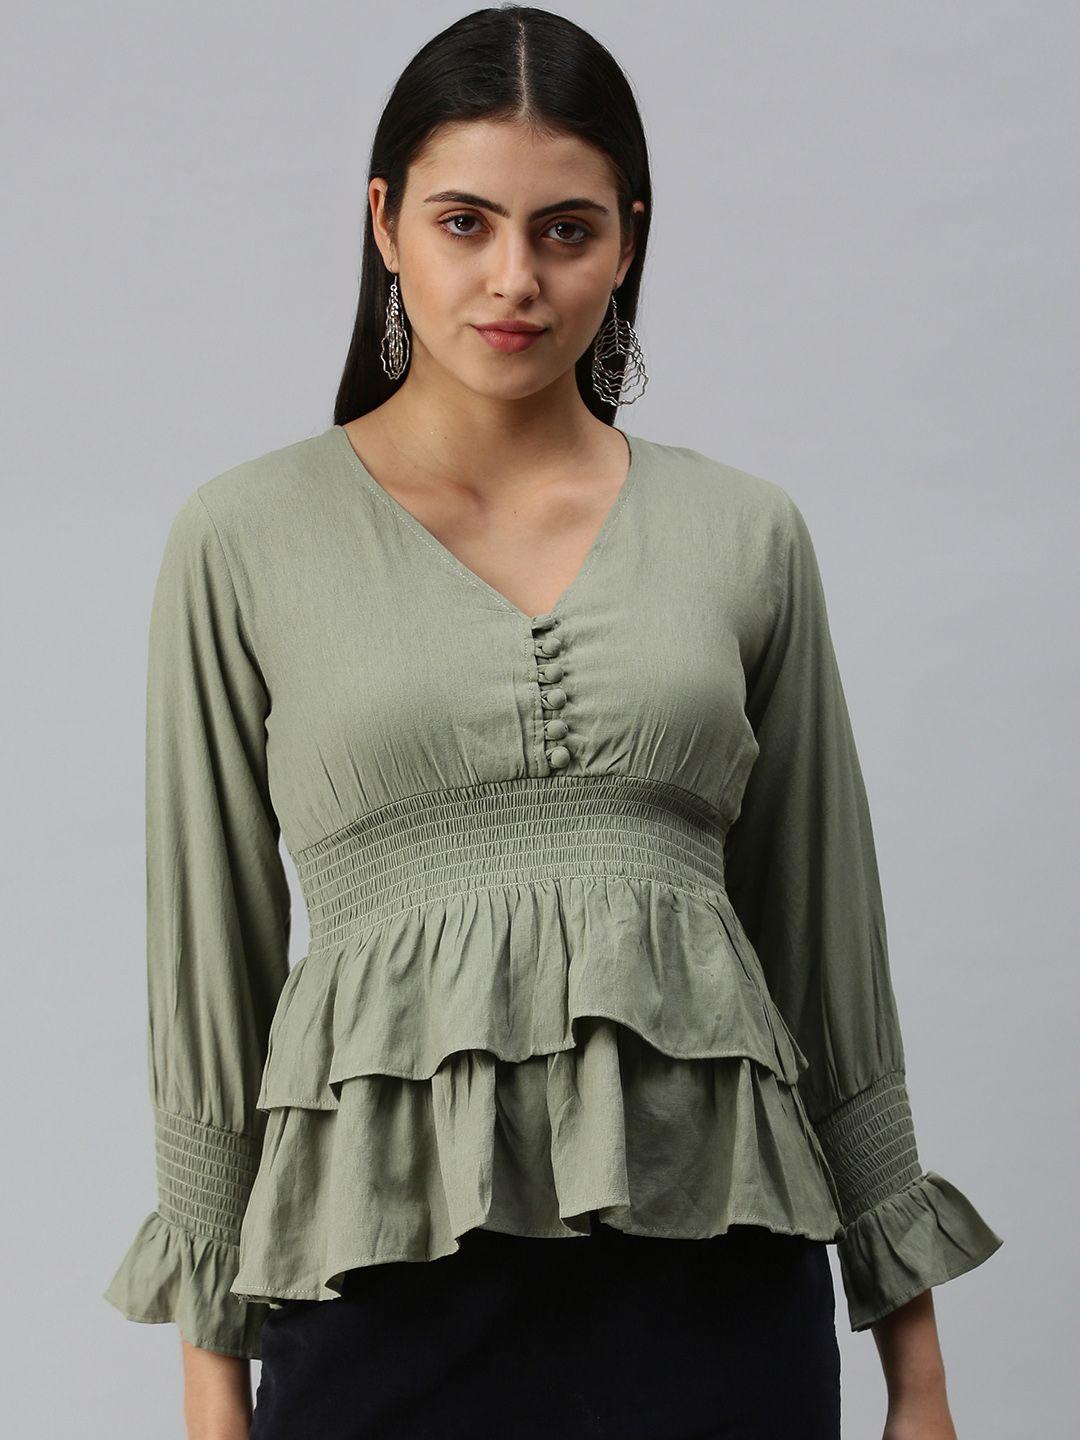 showoff olive green empire top